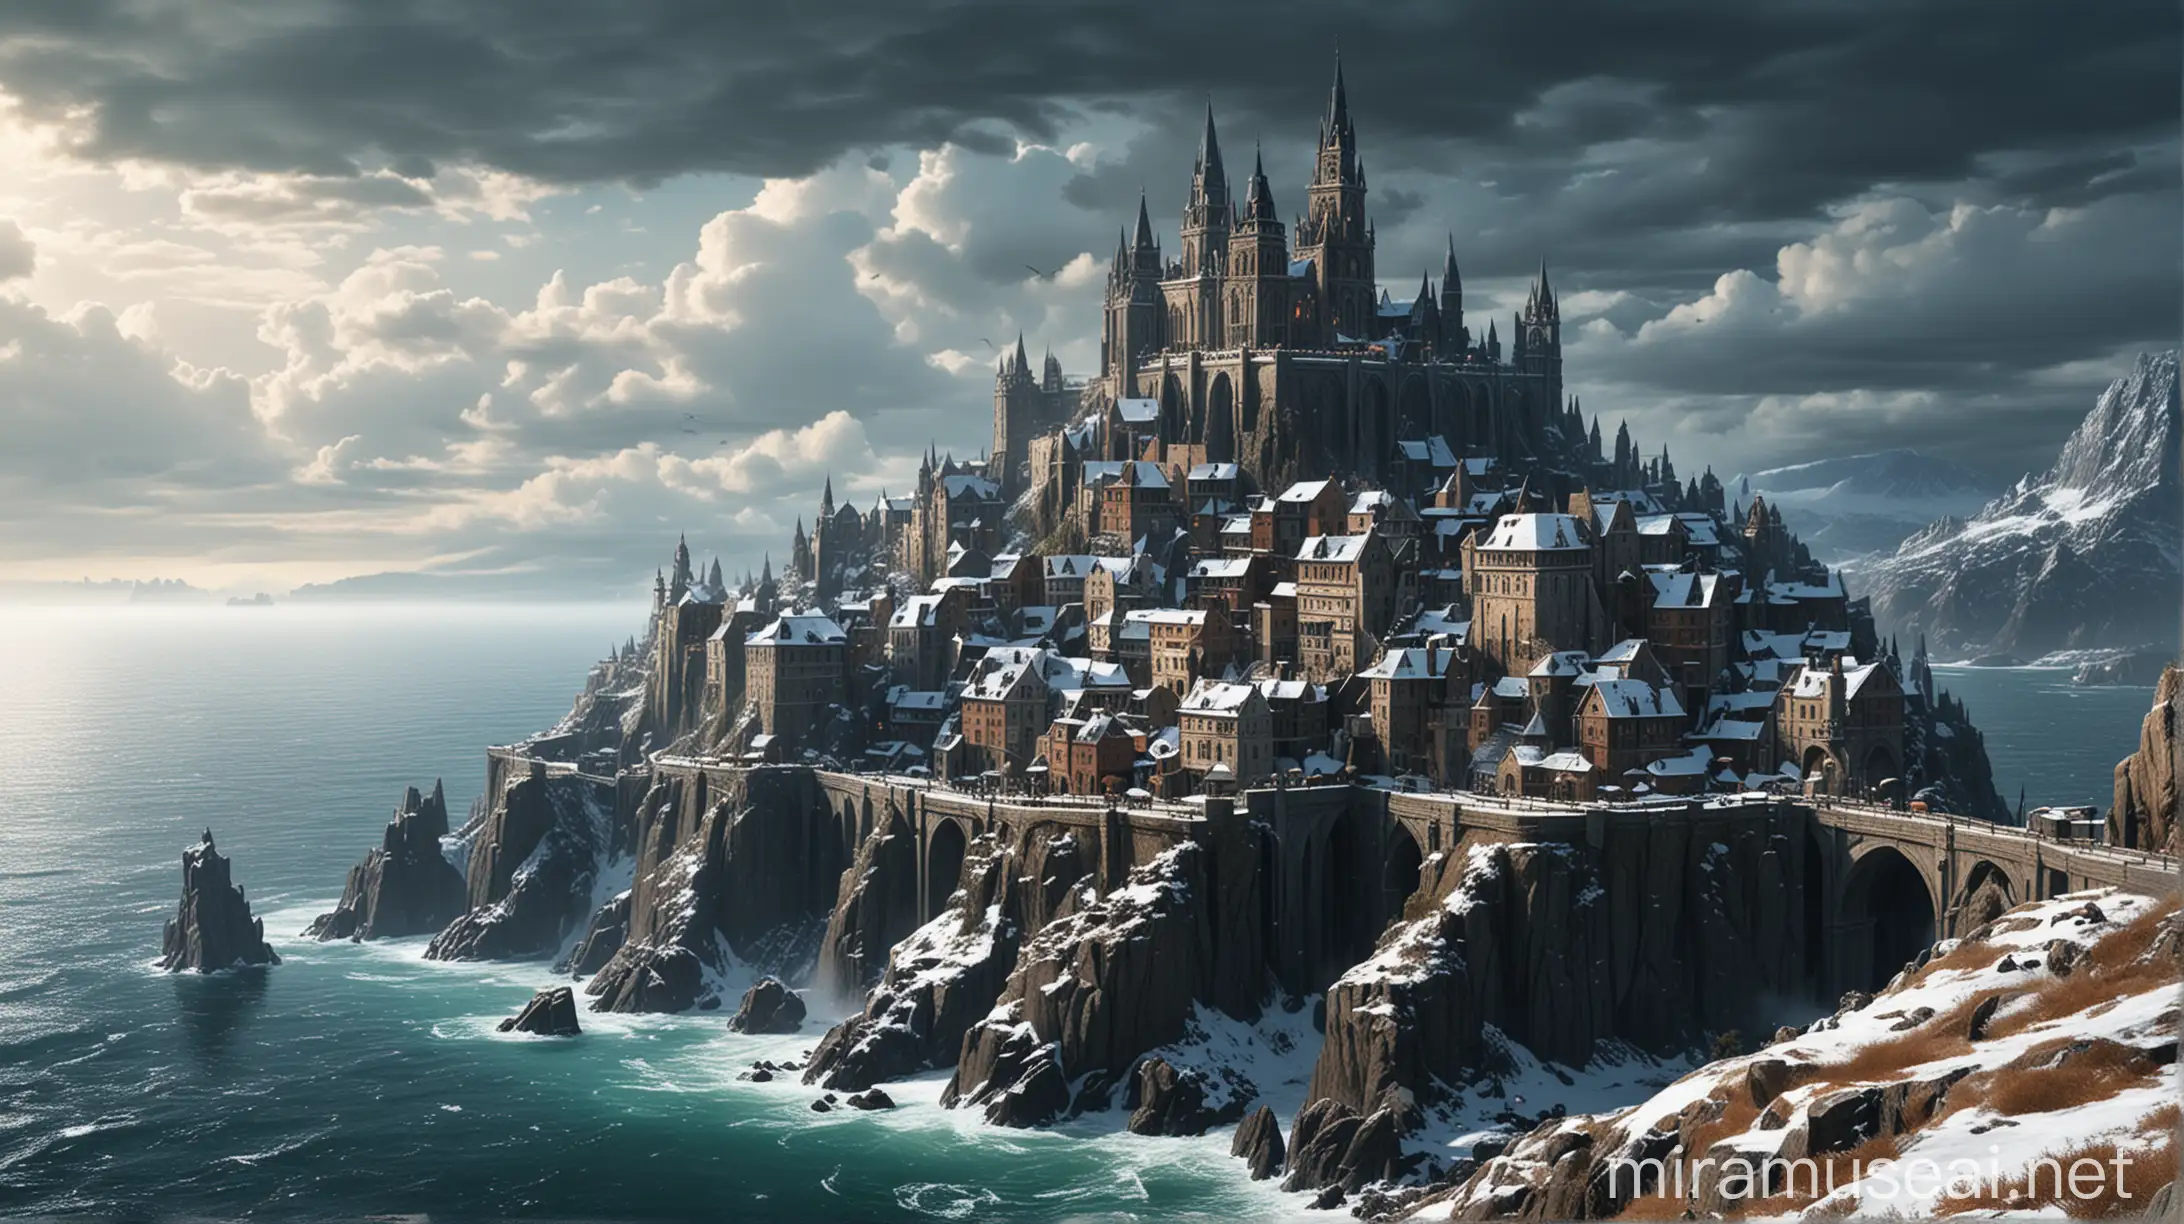 a fantasy gothic city on a promontory facing a infinite sea, there is a snow on the coast. There is a Magic academy on the highest point of the city, look like real